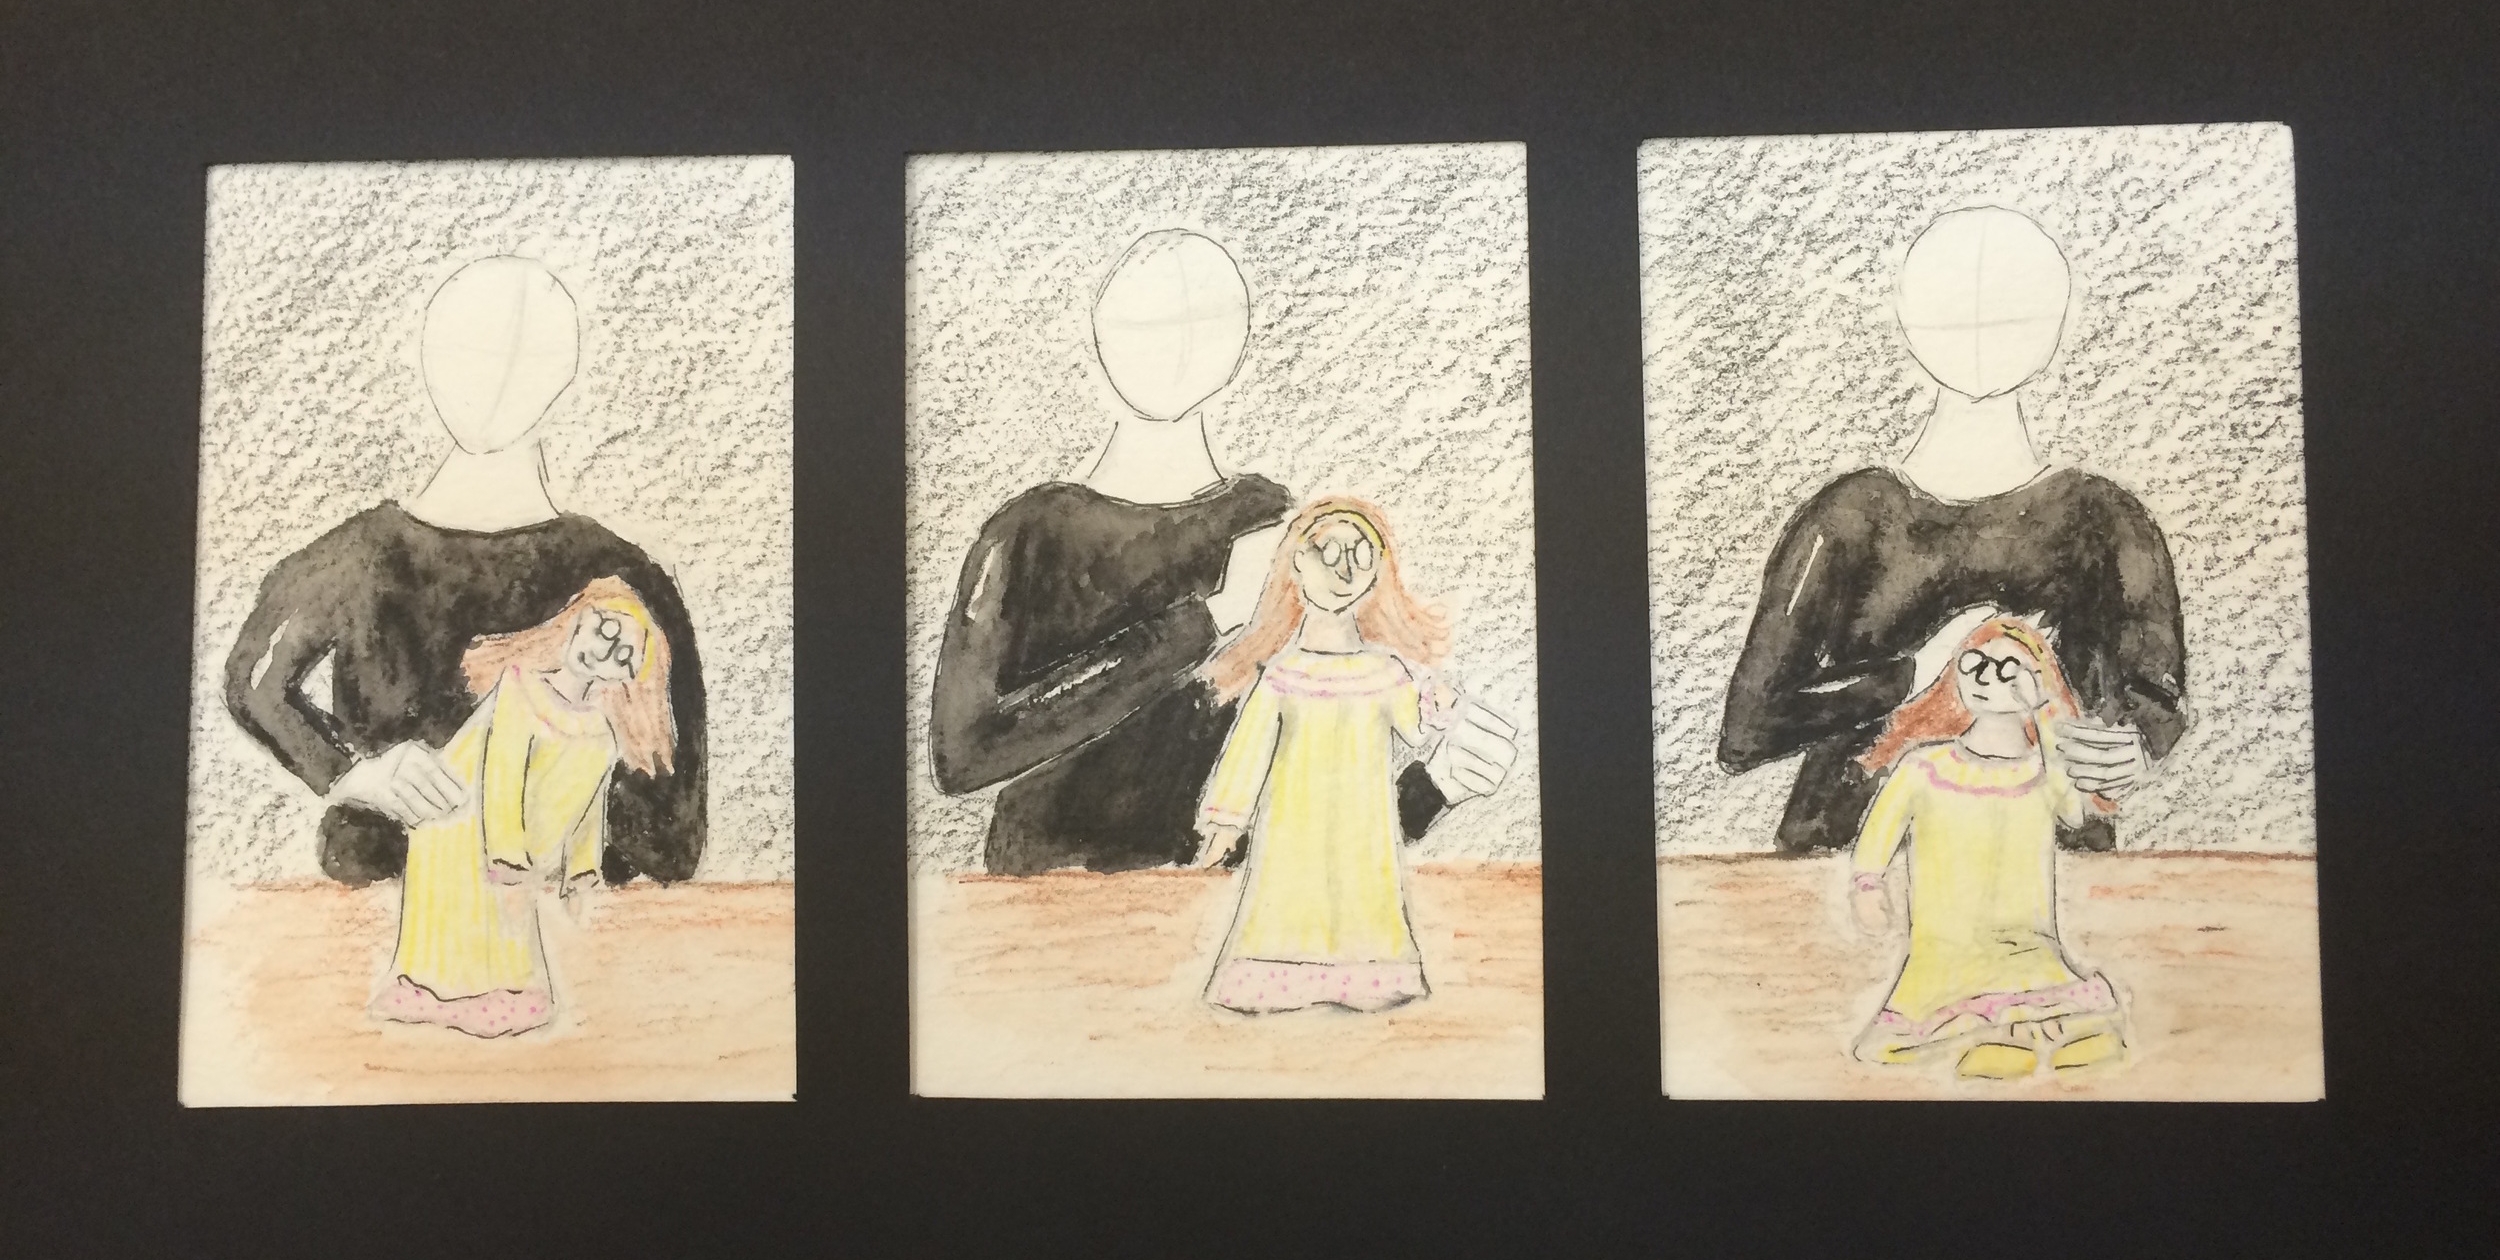  Designs created by Aubrey for Sophie in  The BFG , produced at UH Manoa 